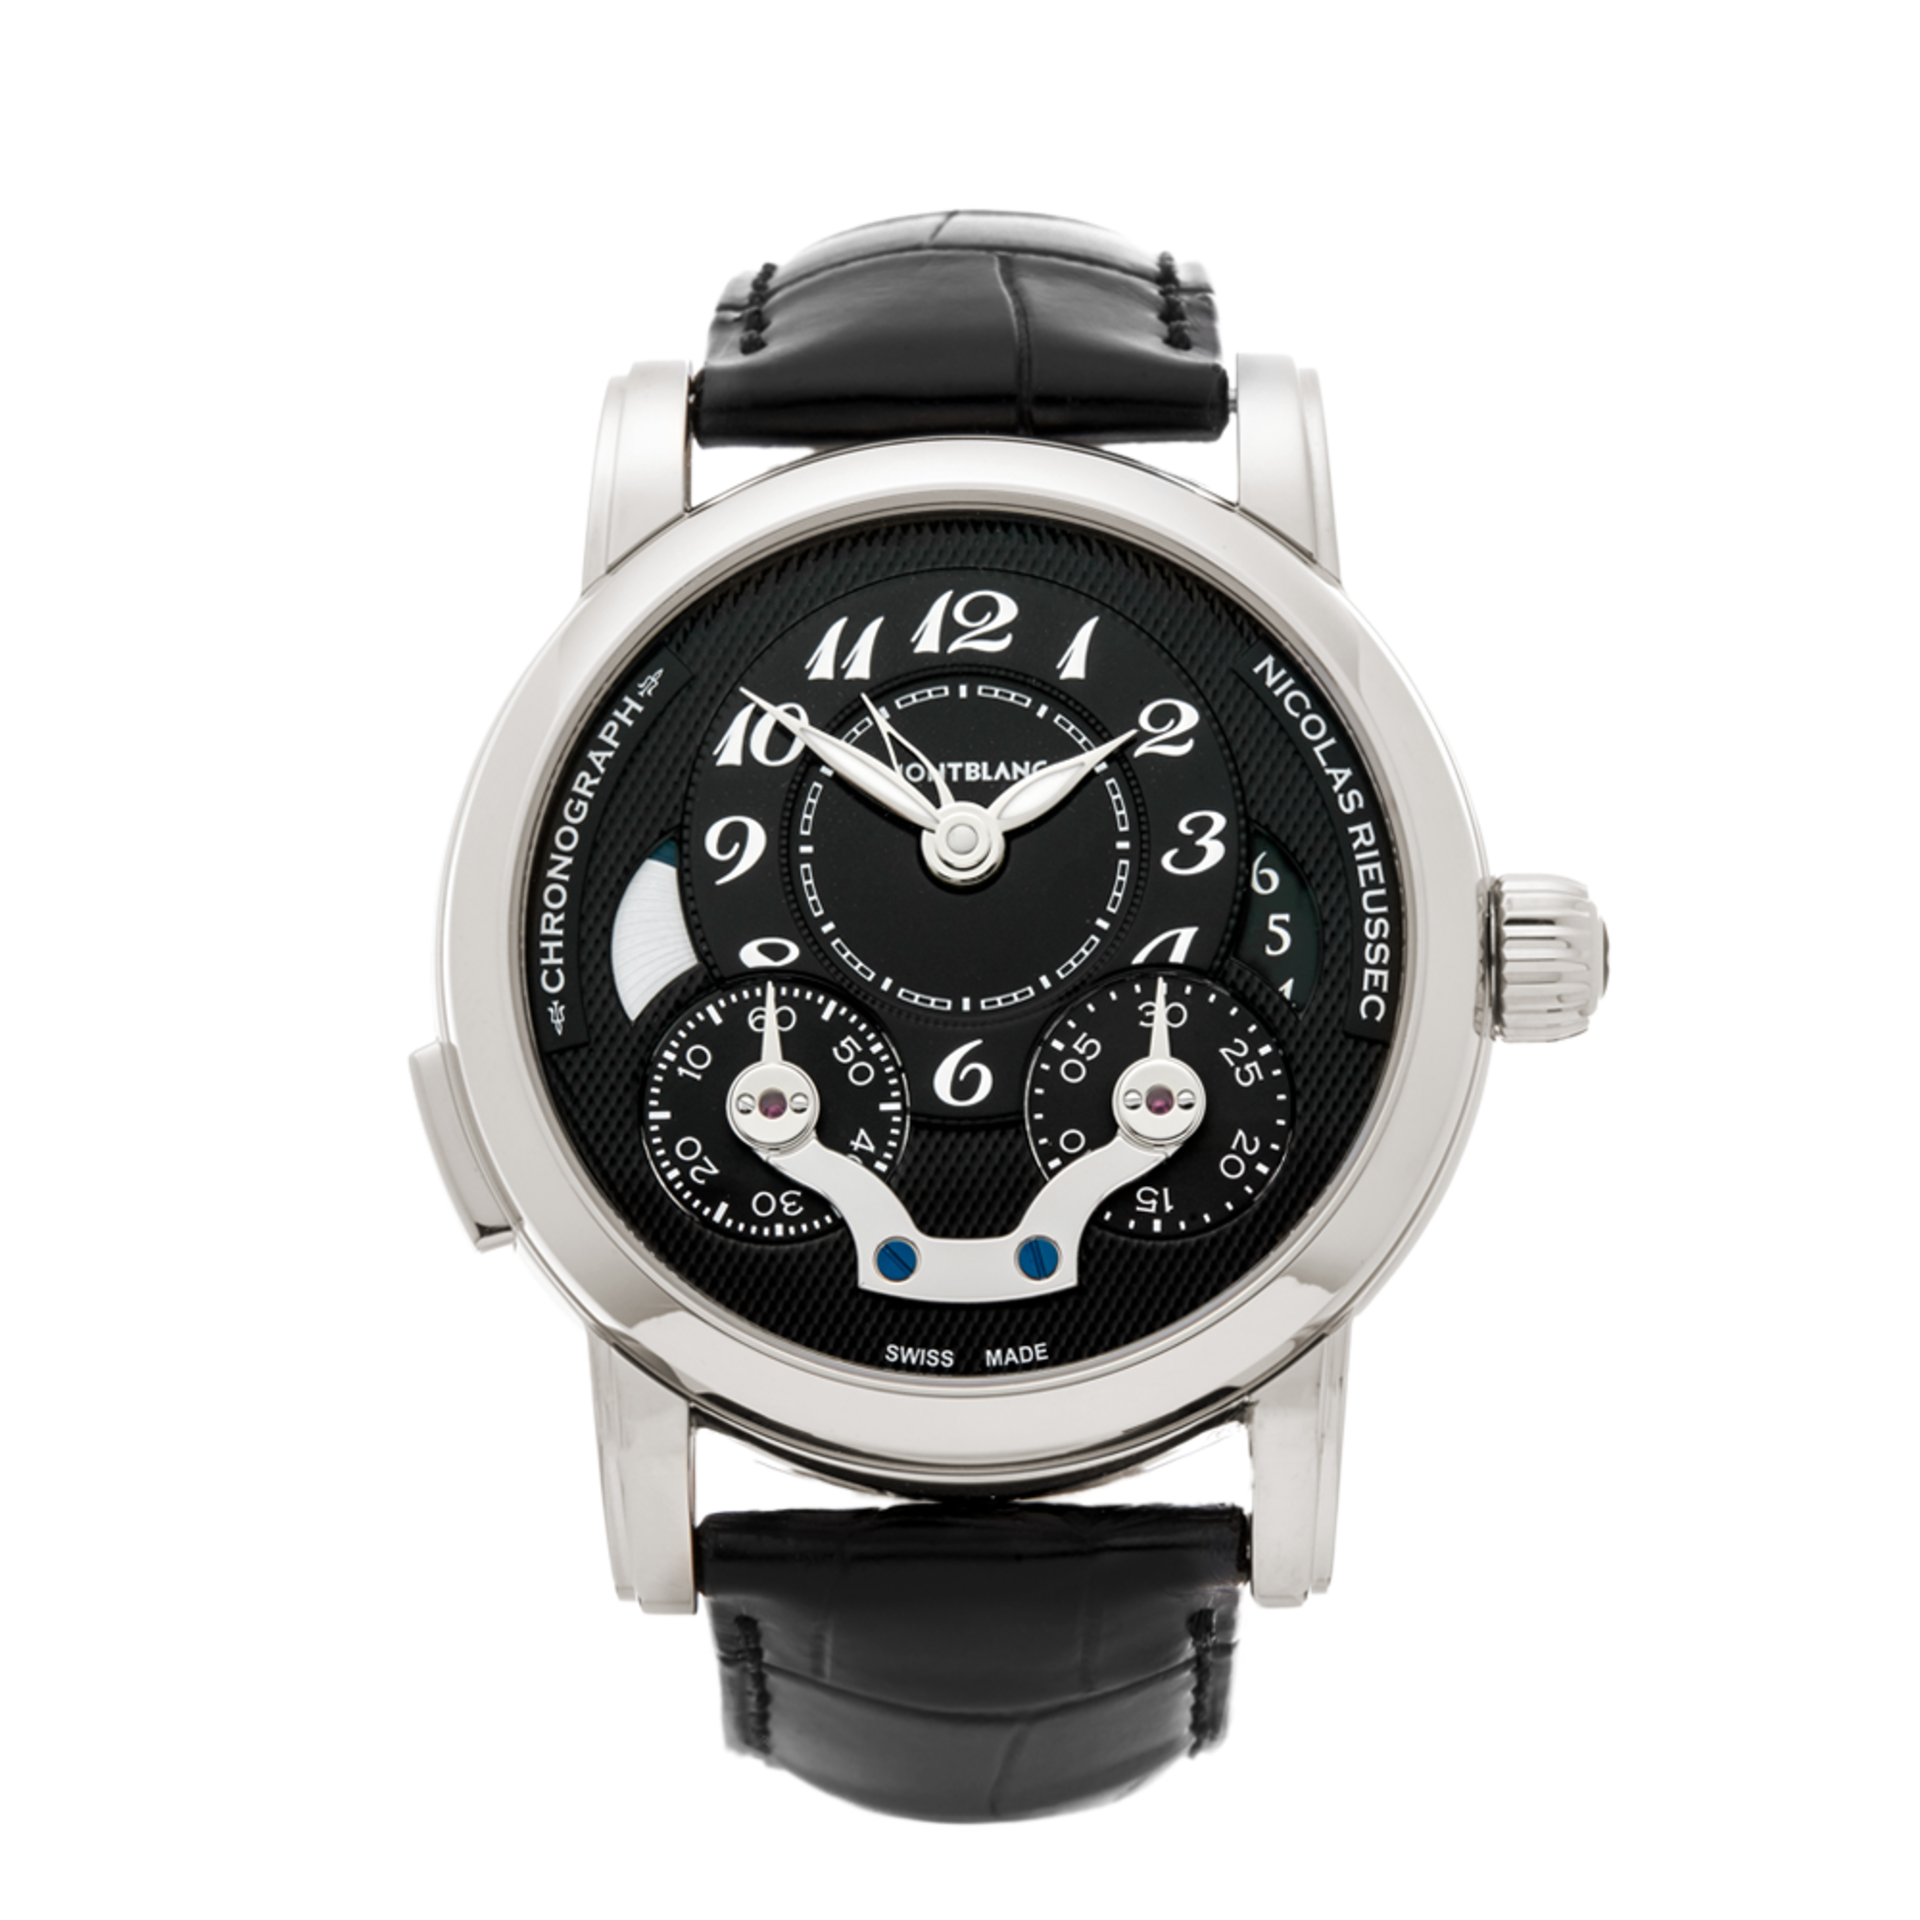 2017 Montblanc Nicolas Rieussec 43mm Stainless Steel - 106488 - Image 2 of 6